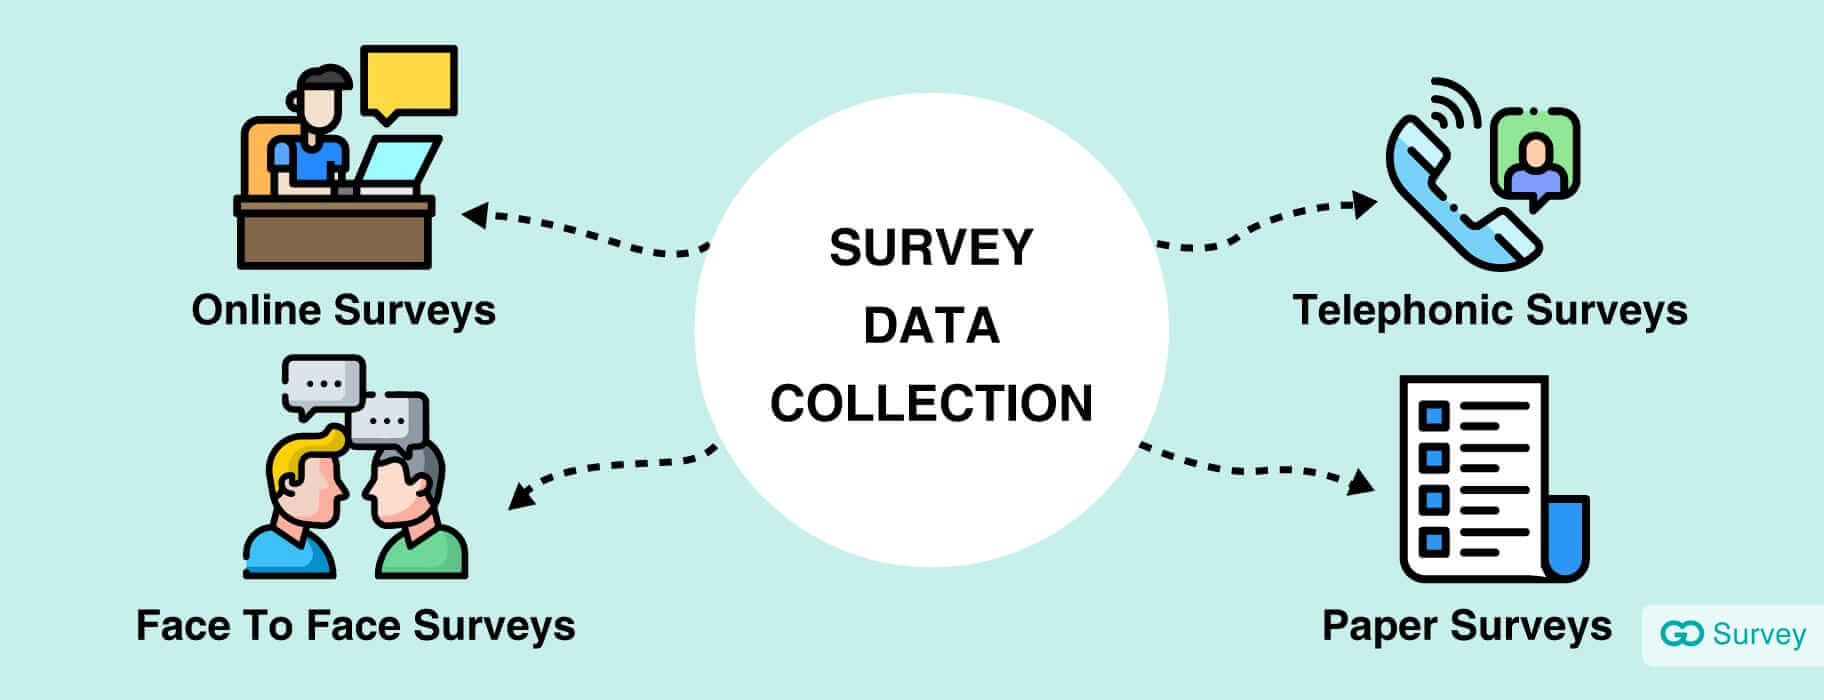 Survey or Data Collection